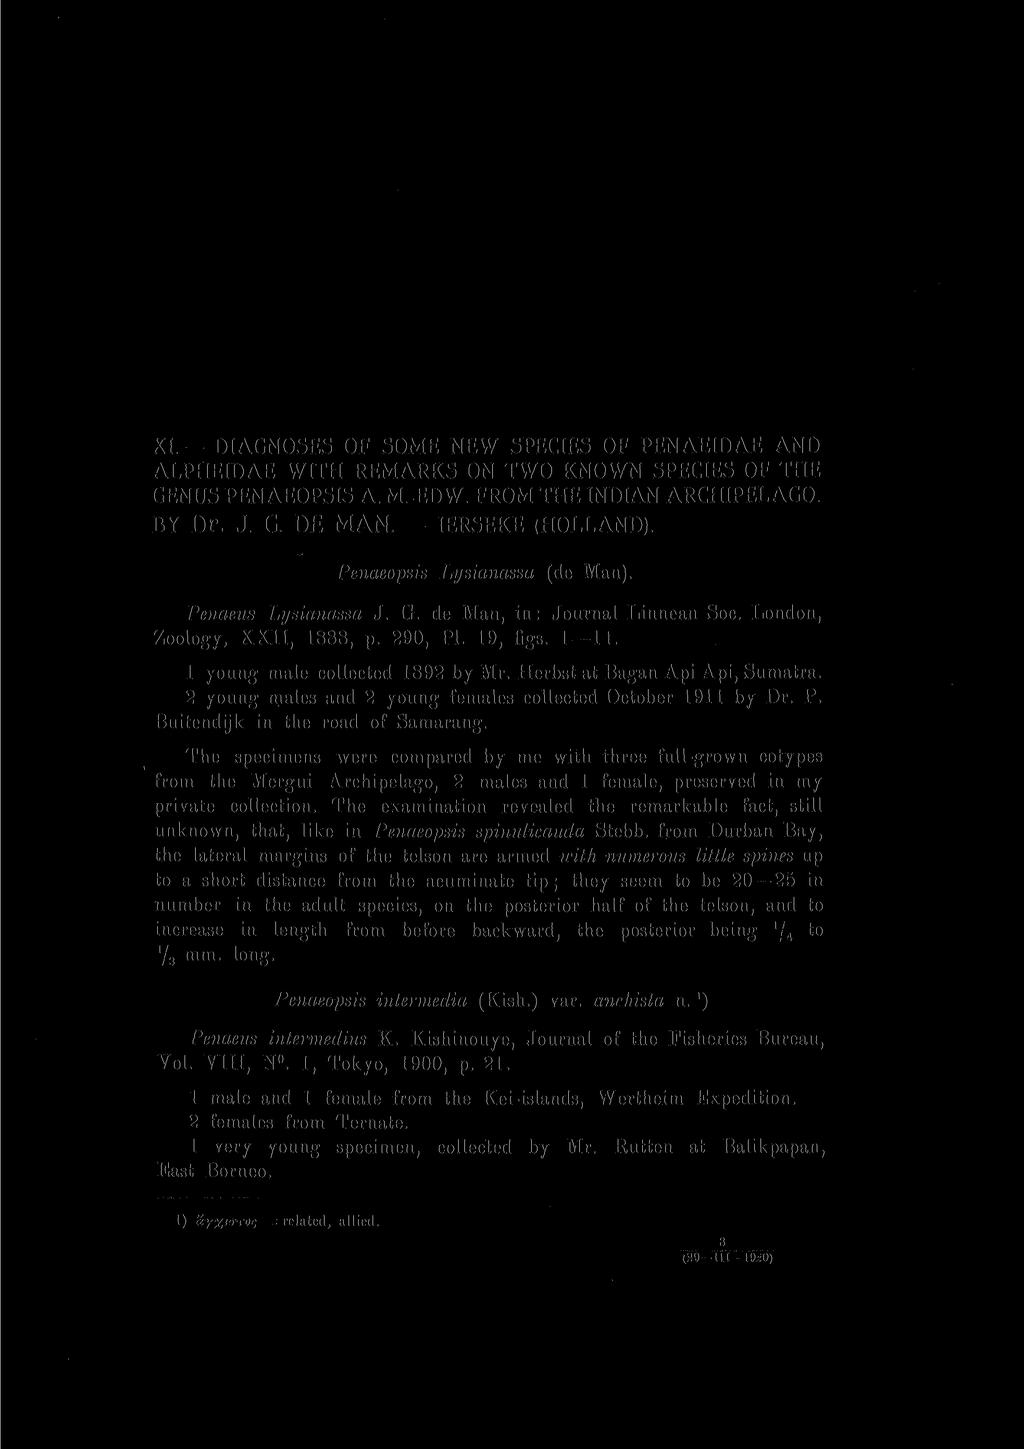 XI. DIAGNOSES OF SOME NEW SPECIES OF PENAEIDAE AND ALPHEIDAE WITH REMARKS ON TWO KNOWN SPECIES OF THE GENUS PENAEOPSIS A. M.-EDW. FROM THE INDIAN ARCHIPELAGO. BY Dr. J. G. DE MAN. - IERSEKE (HOLLAND).